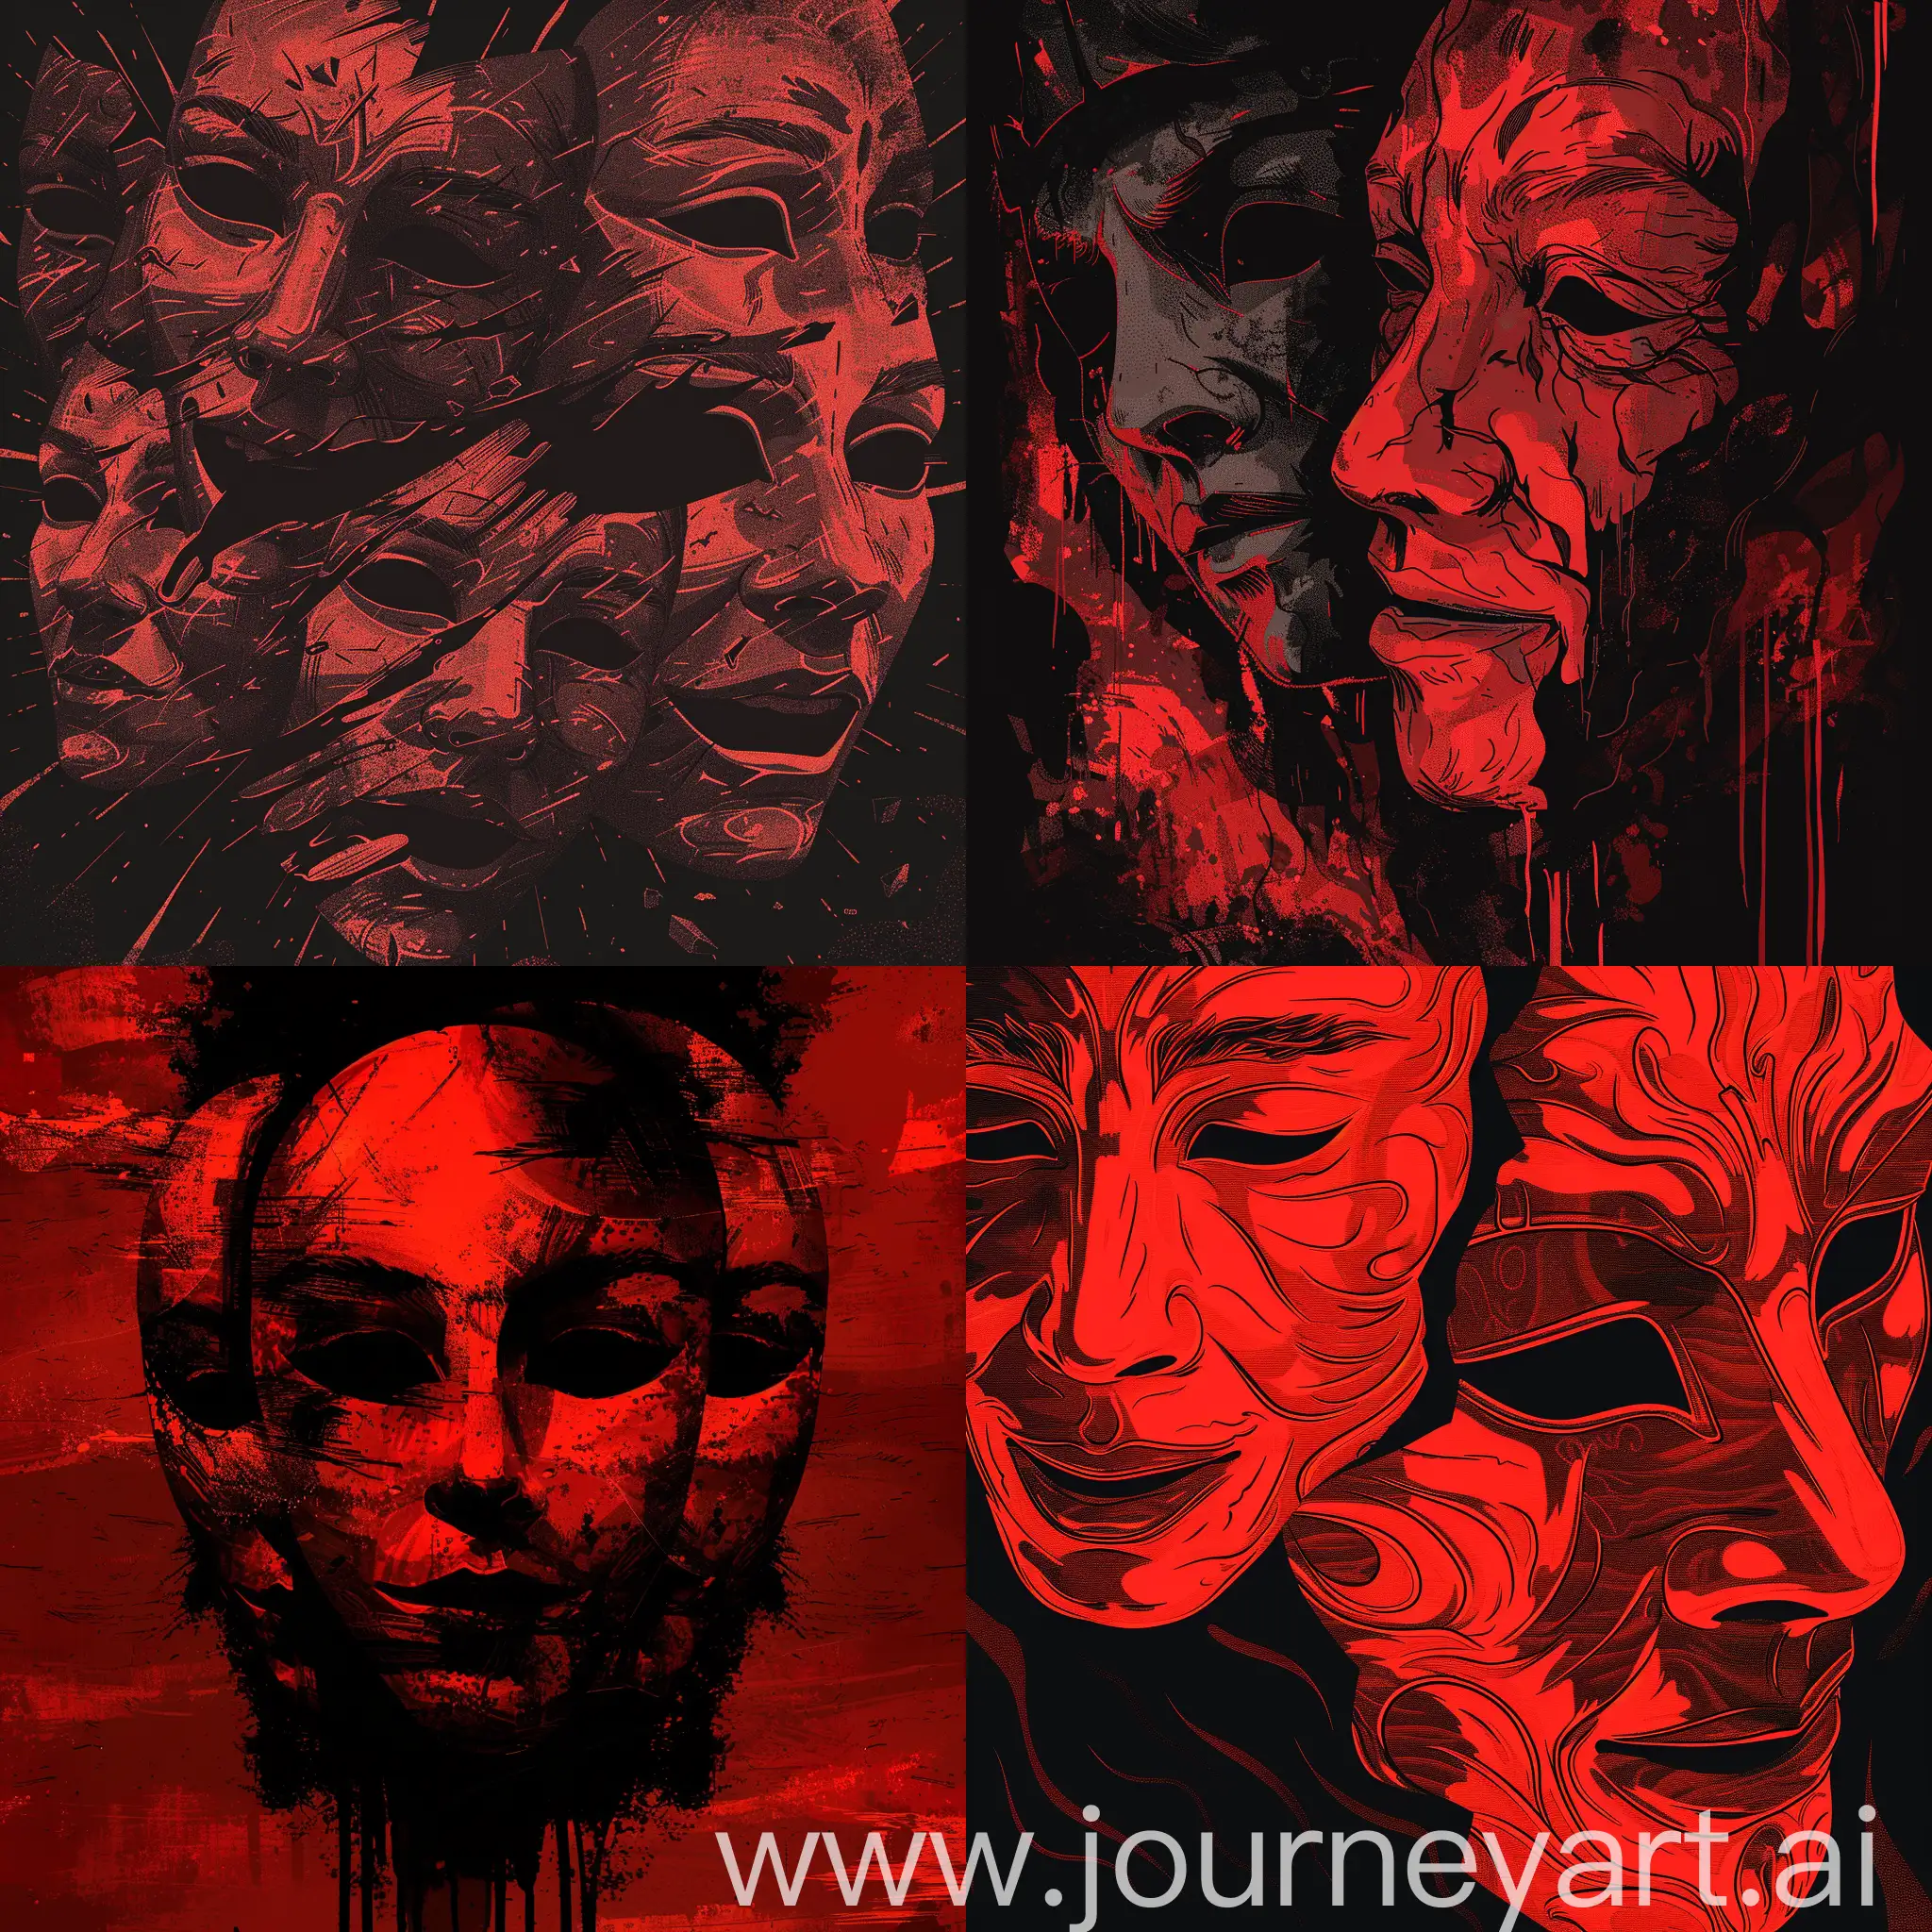 Create an illustration in red and black tones with philosophical meanings. Create an atmosphere themed around the idea that every mask falls in the face of death. No text should be used, but a striking illustration style should be employed.